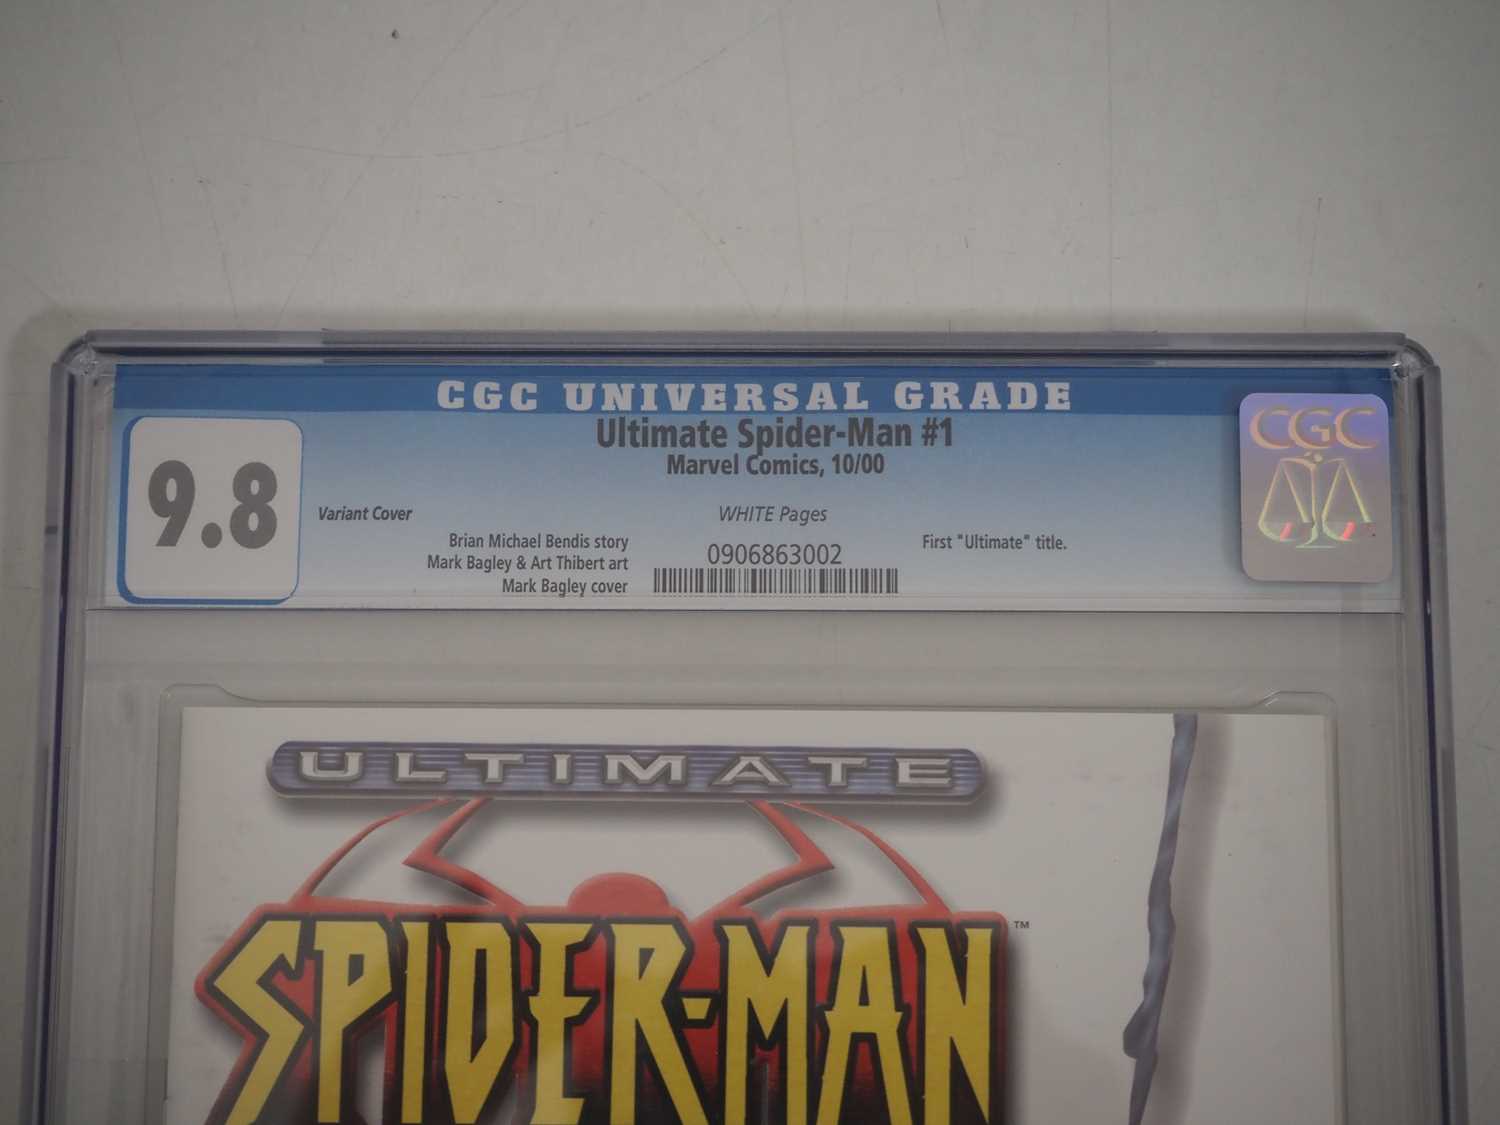 ULTIMATE SPIDER-MAN #1 VARIANT COVER (2000 - MARVEL) - GRADED 9.8(NM/MINT) by CGC - Includes the - Image 3 of 4